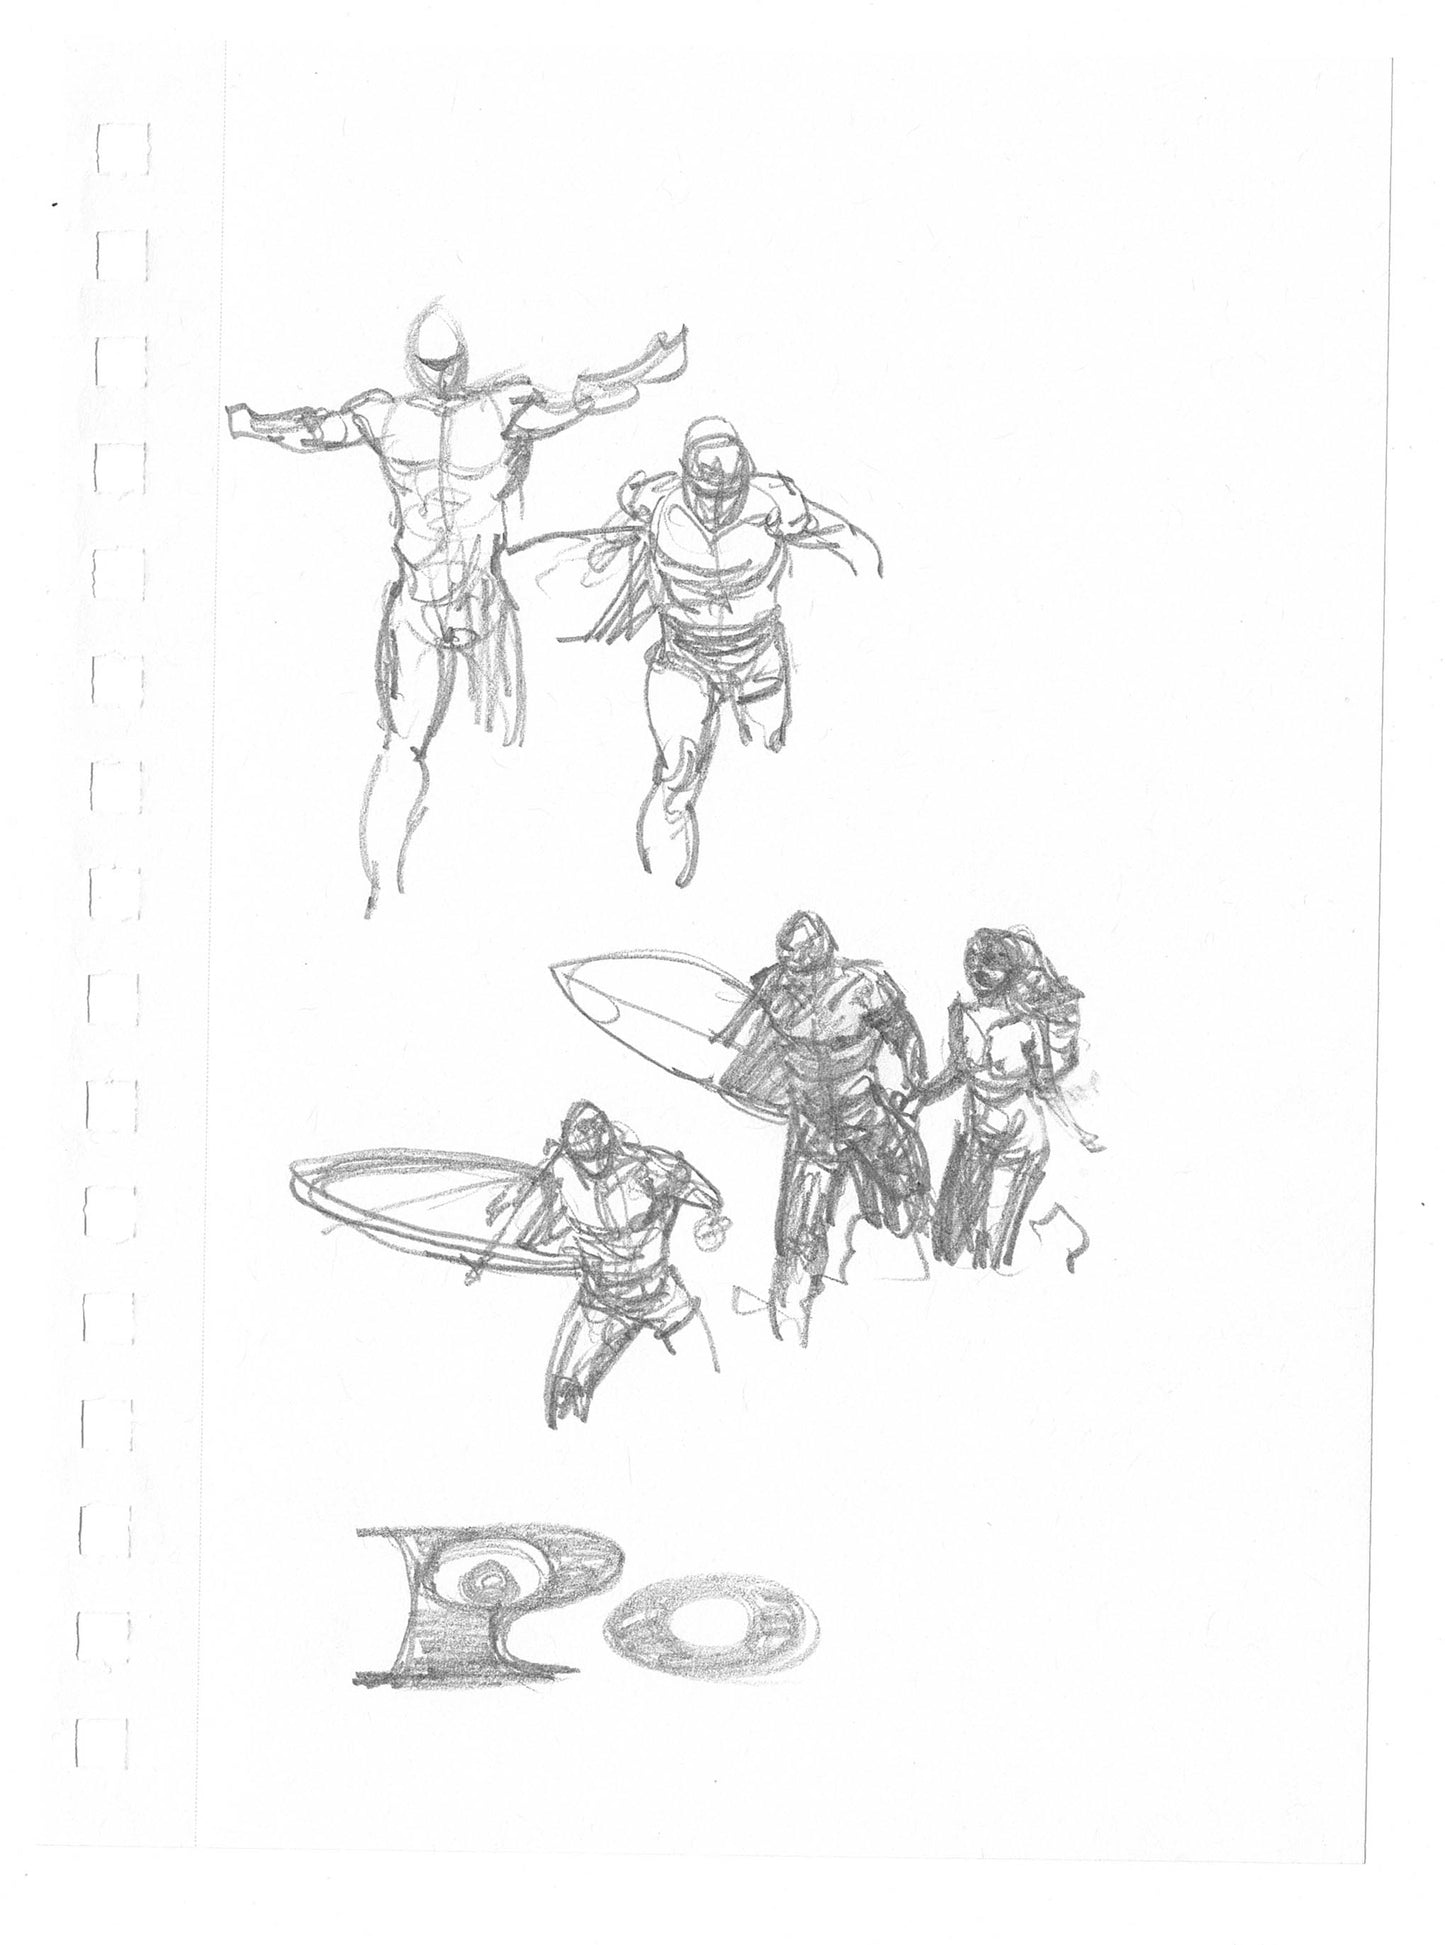 Mike Hoffman Comic Book Artist Personal Original Pencil Art Notebook Page From 2013 A-m48